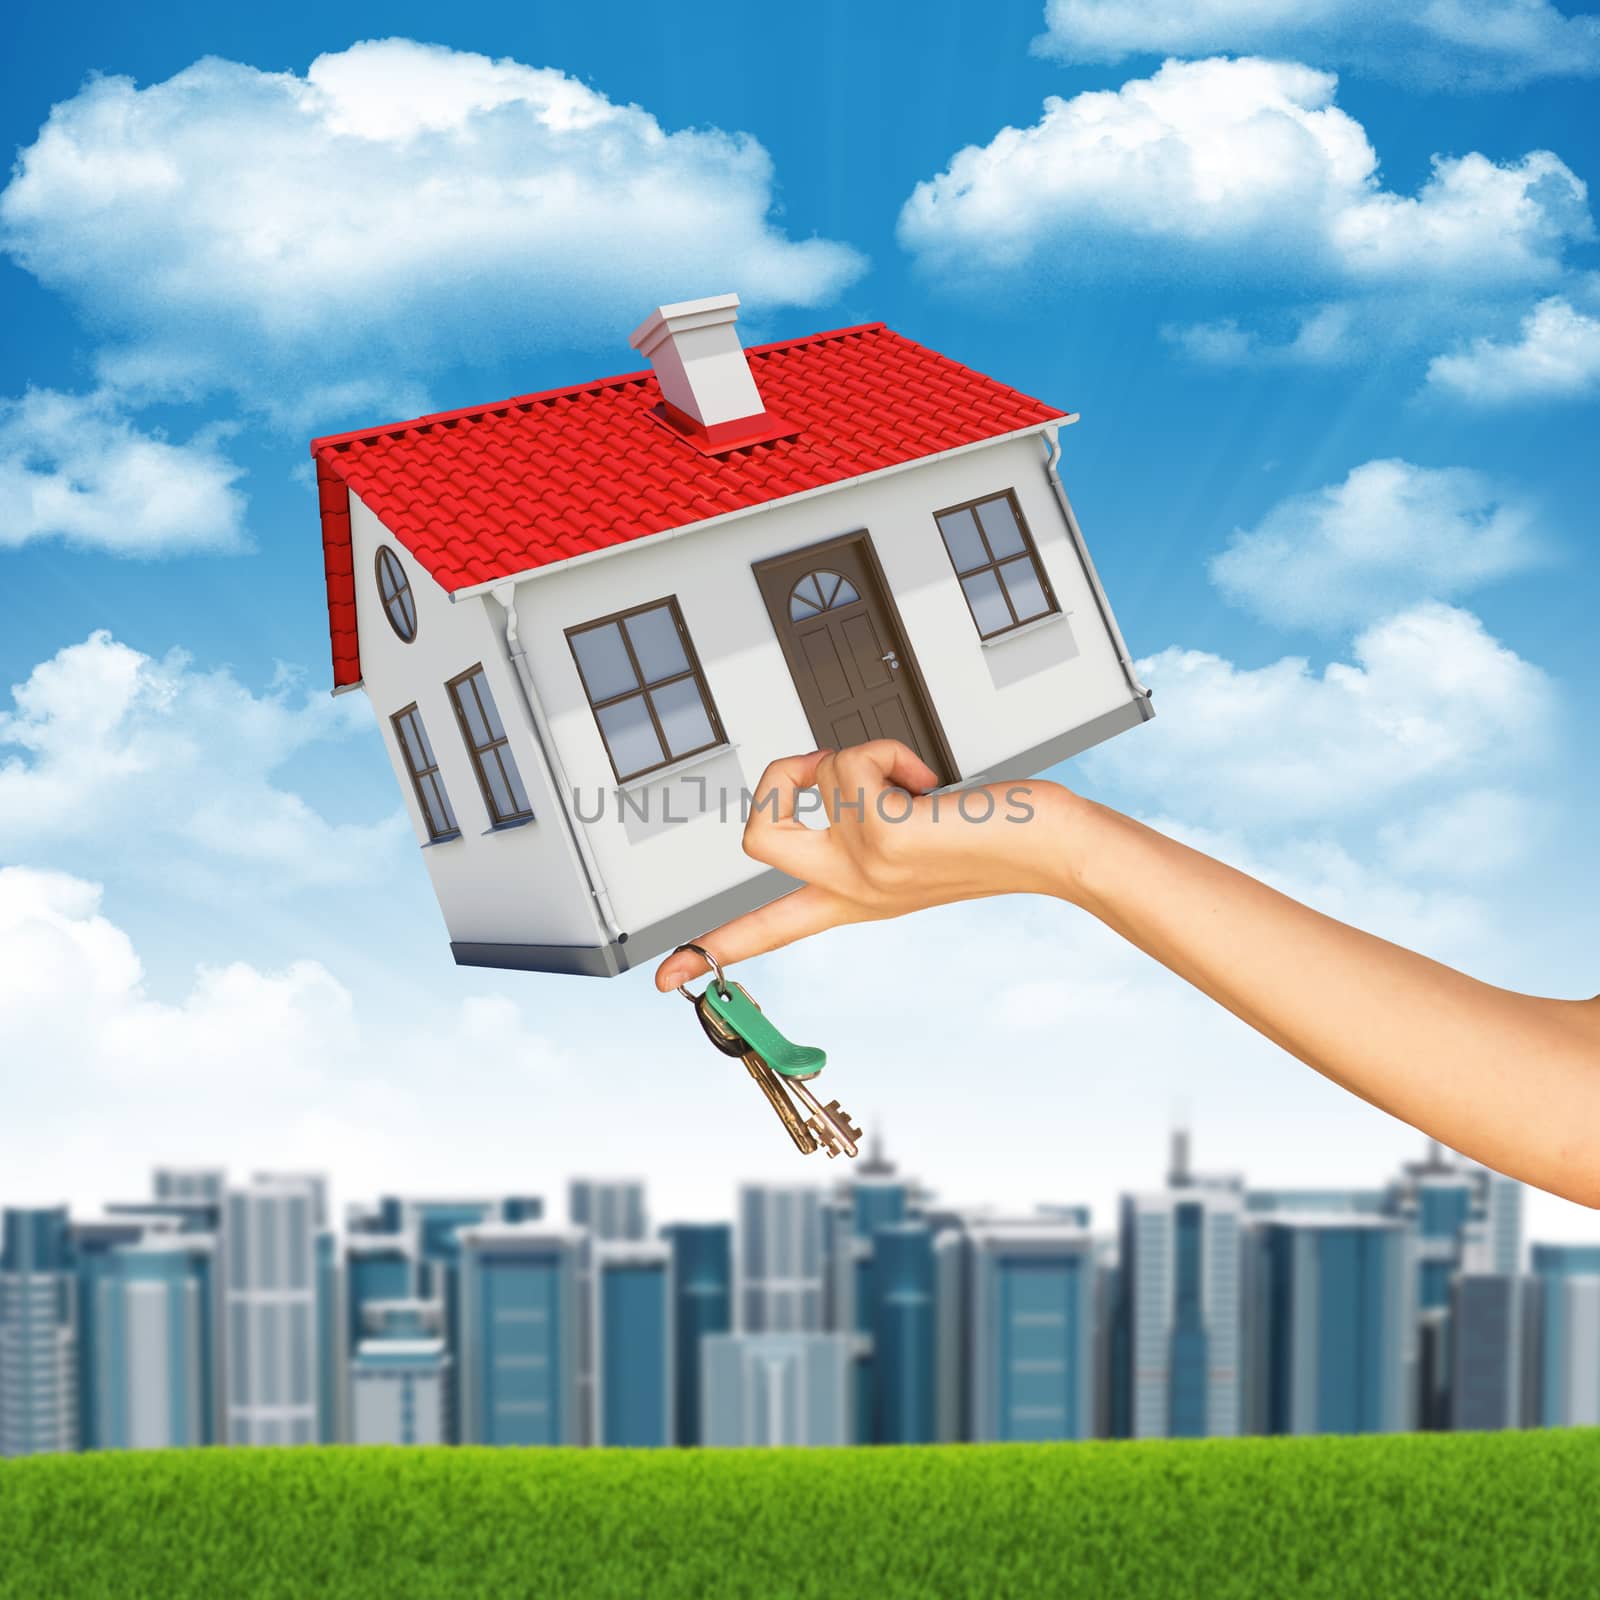 House and keys in businesswomans hand on cityscape background with cloudy blue sky